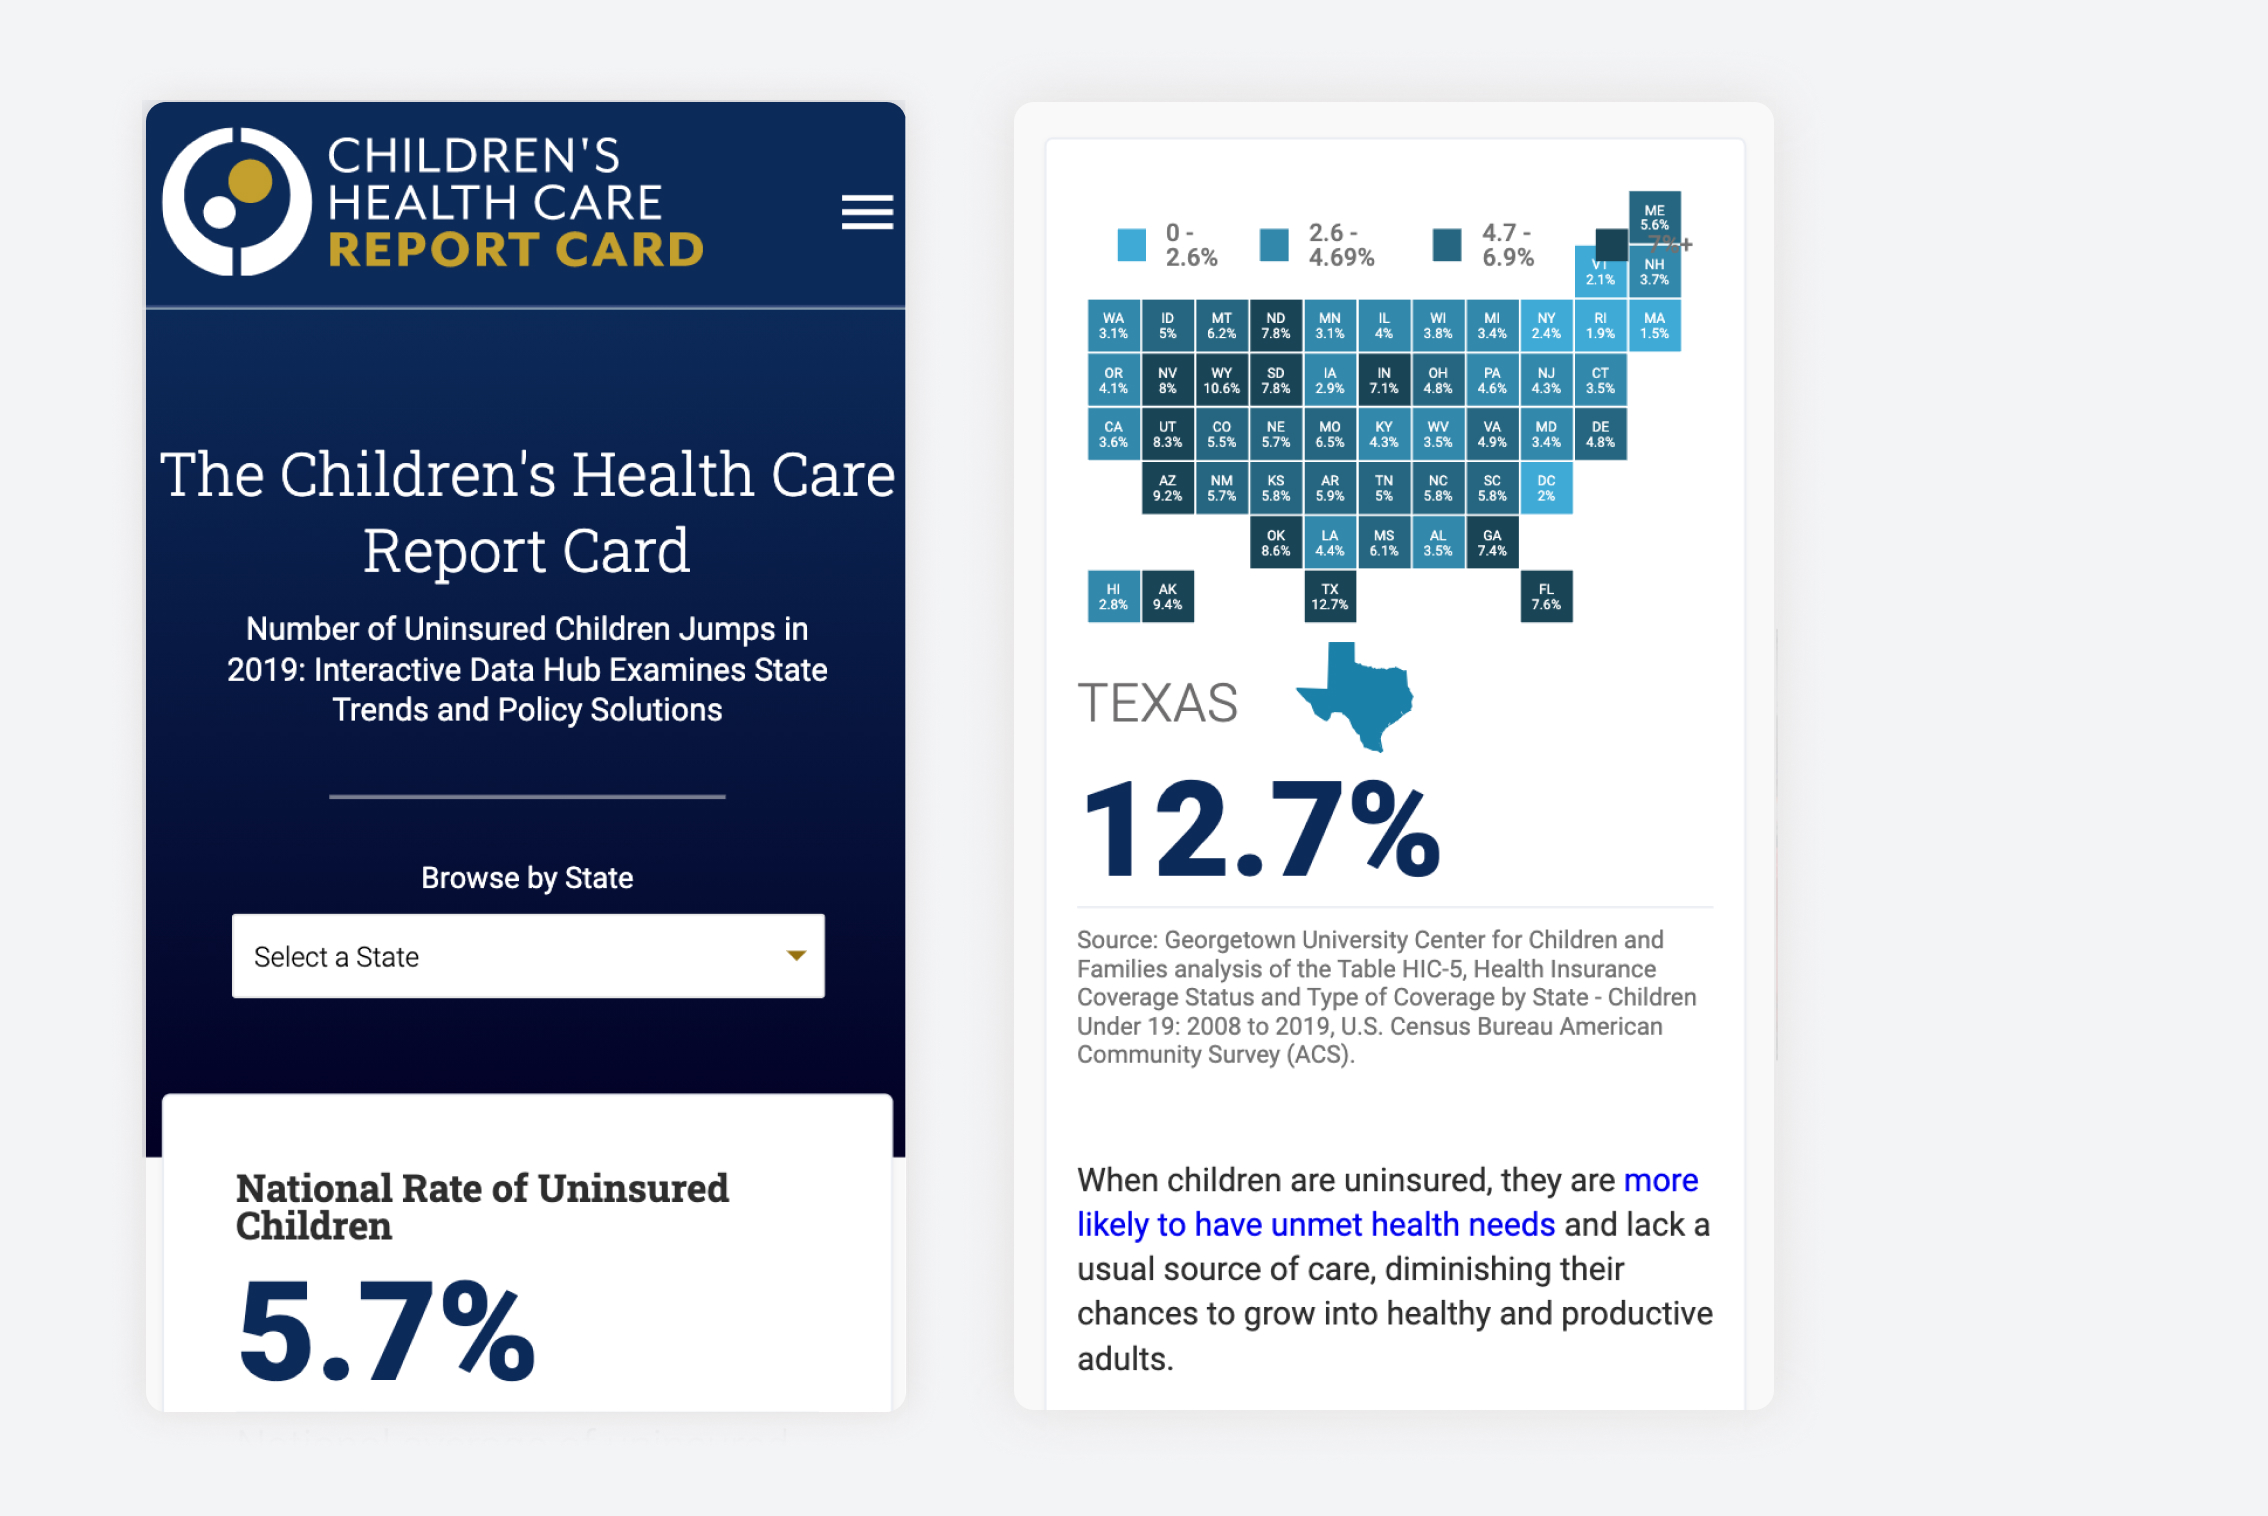 Two views of the mobile site, one the front page with the title of the report card and a search box to browse by state. The other is a graphical representation of the United States as shaded squares, with statistics within each one and a large callout at the bottom about Texas